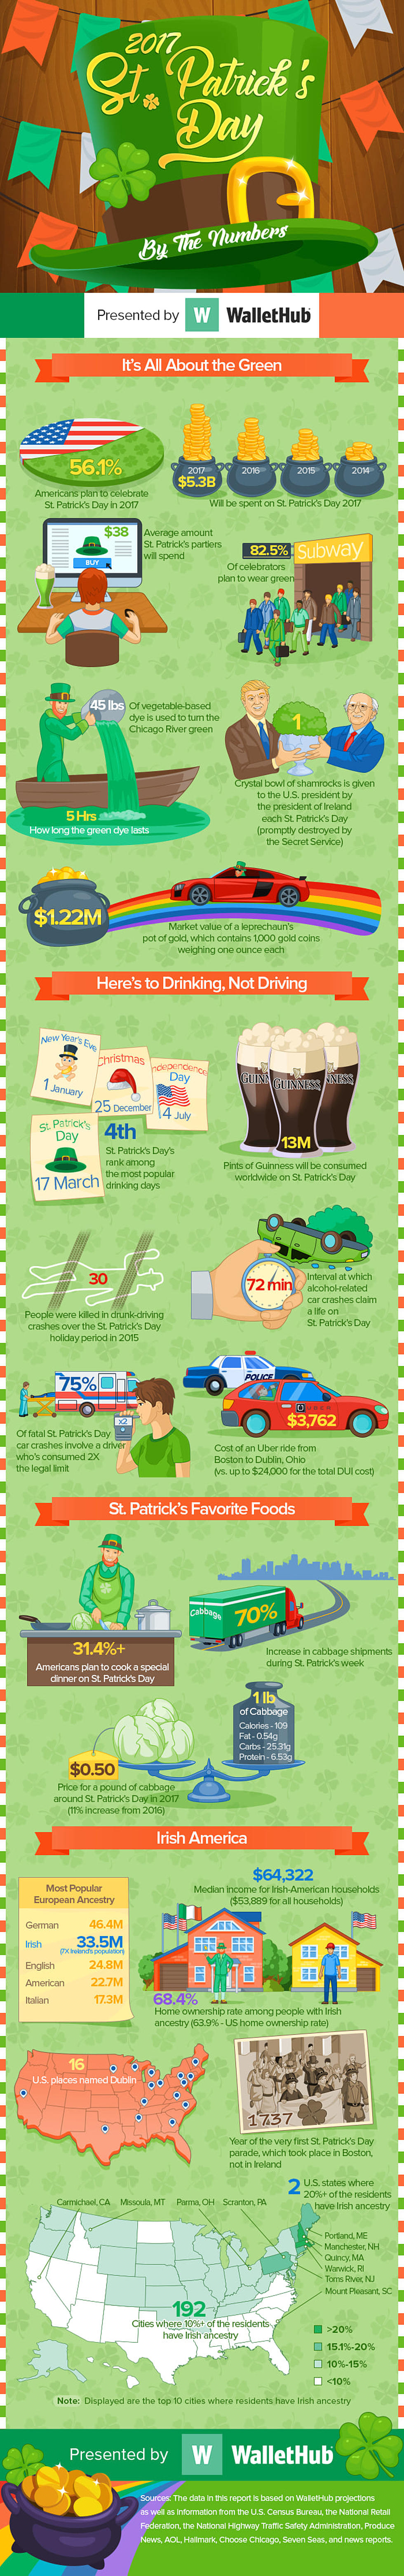 Enjoy These St. Patrick&#8217;s Day Facts and Figures That Will Blow Your Irish-Lovin&#8217; Mind